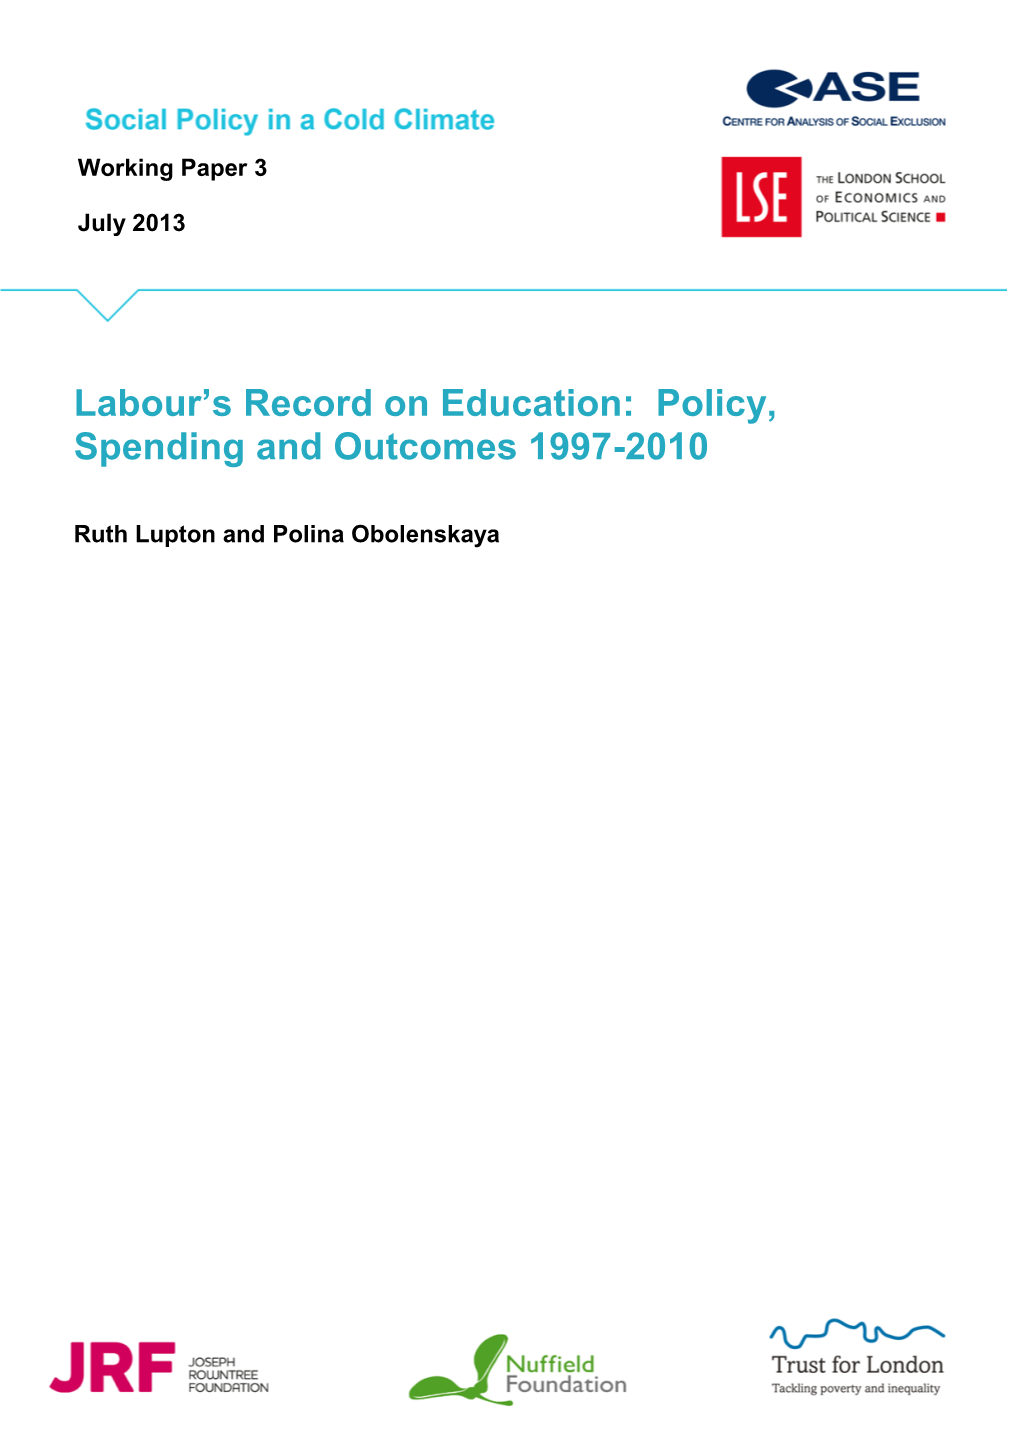 Labour's Record on Education: Policy, Spending and Outcomes